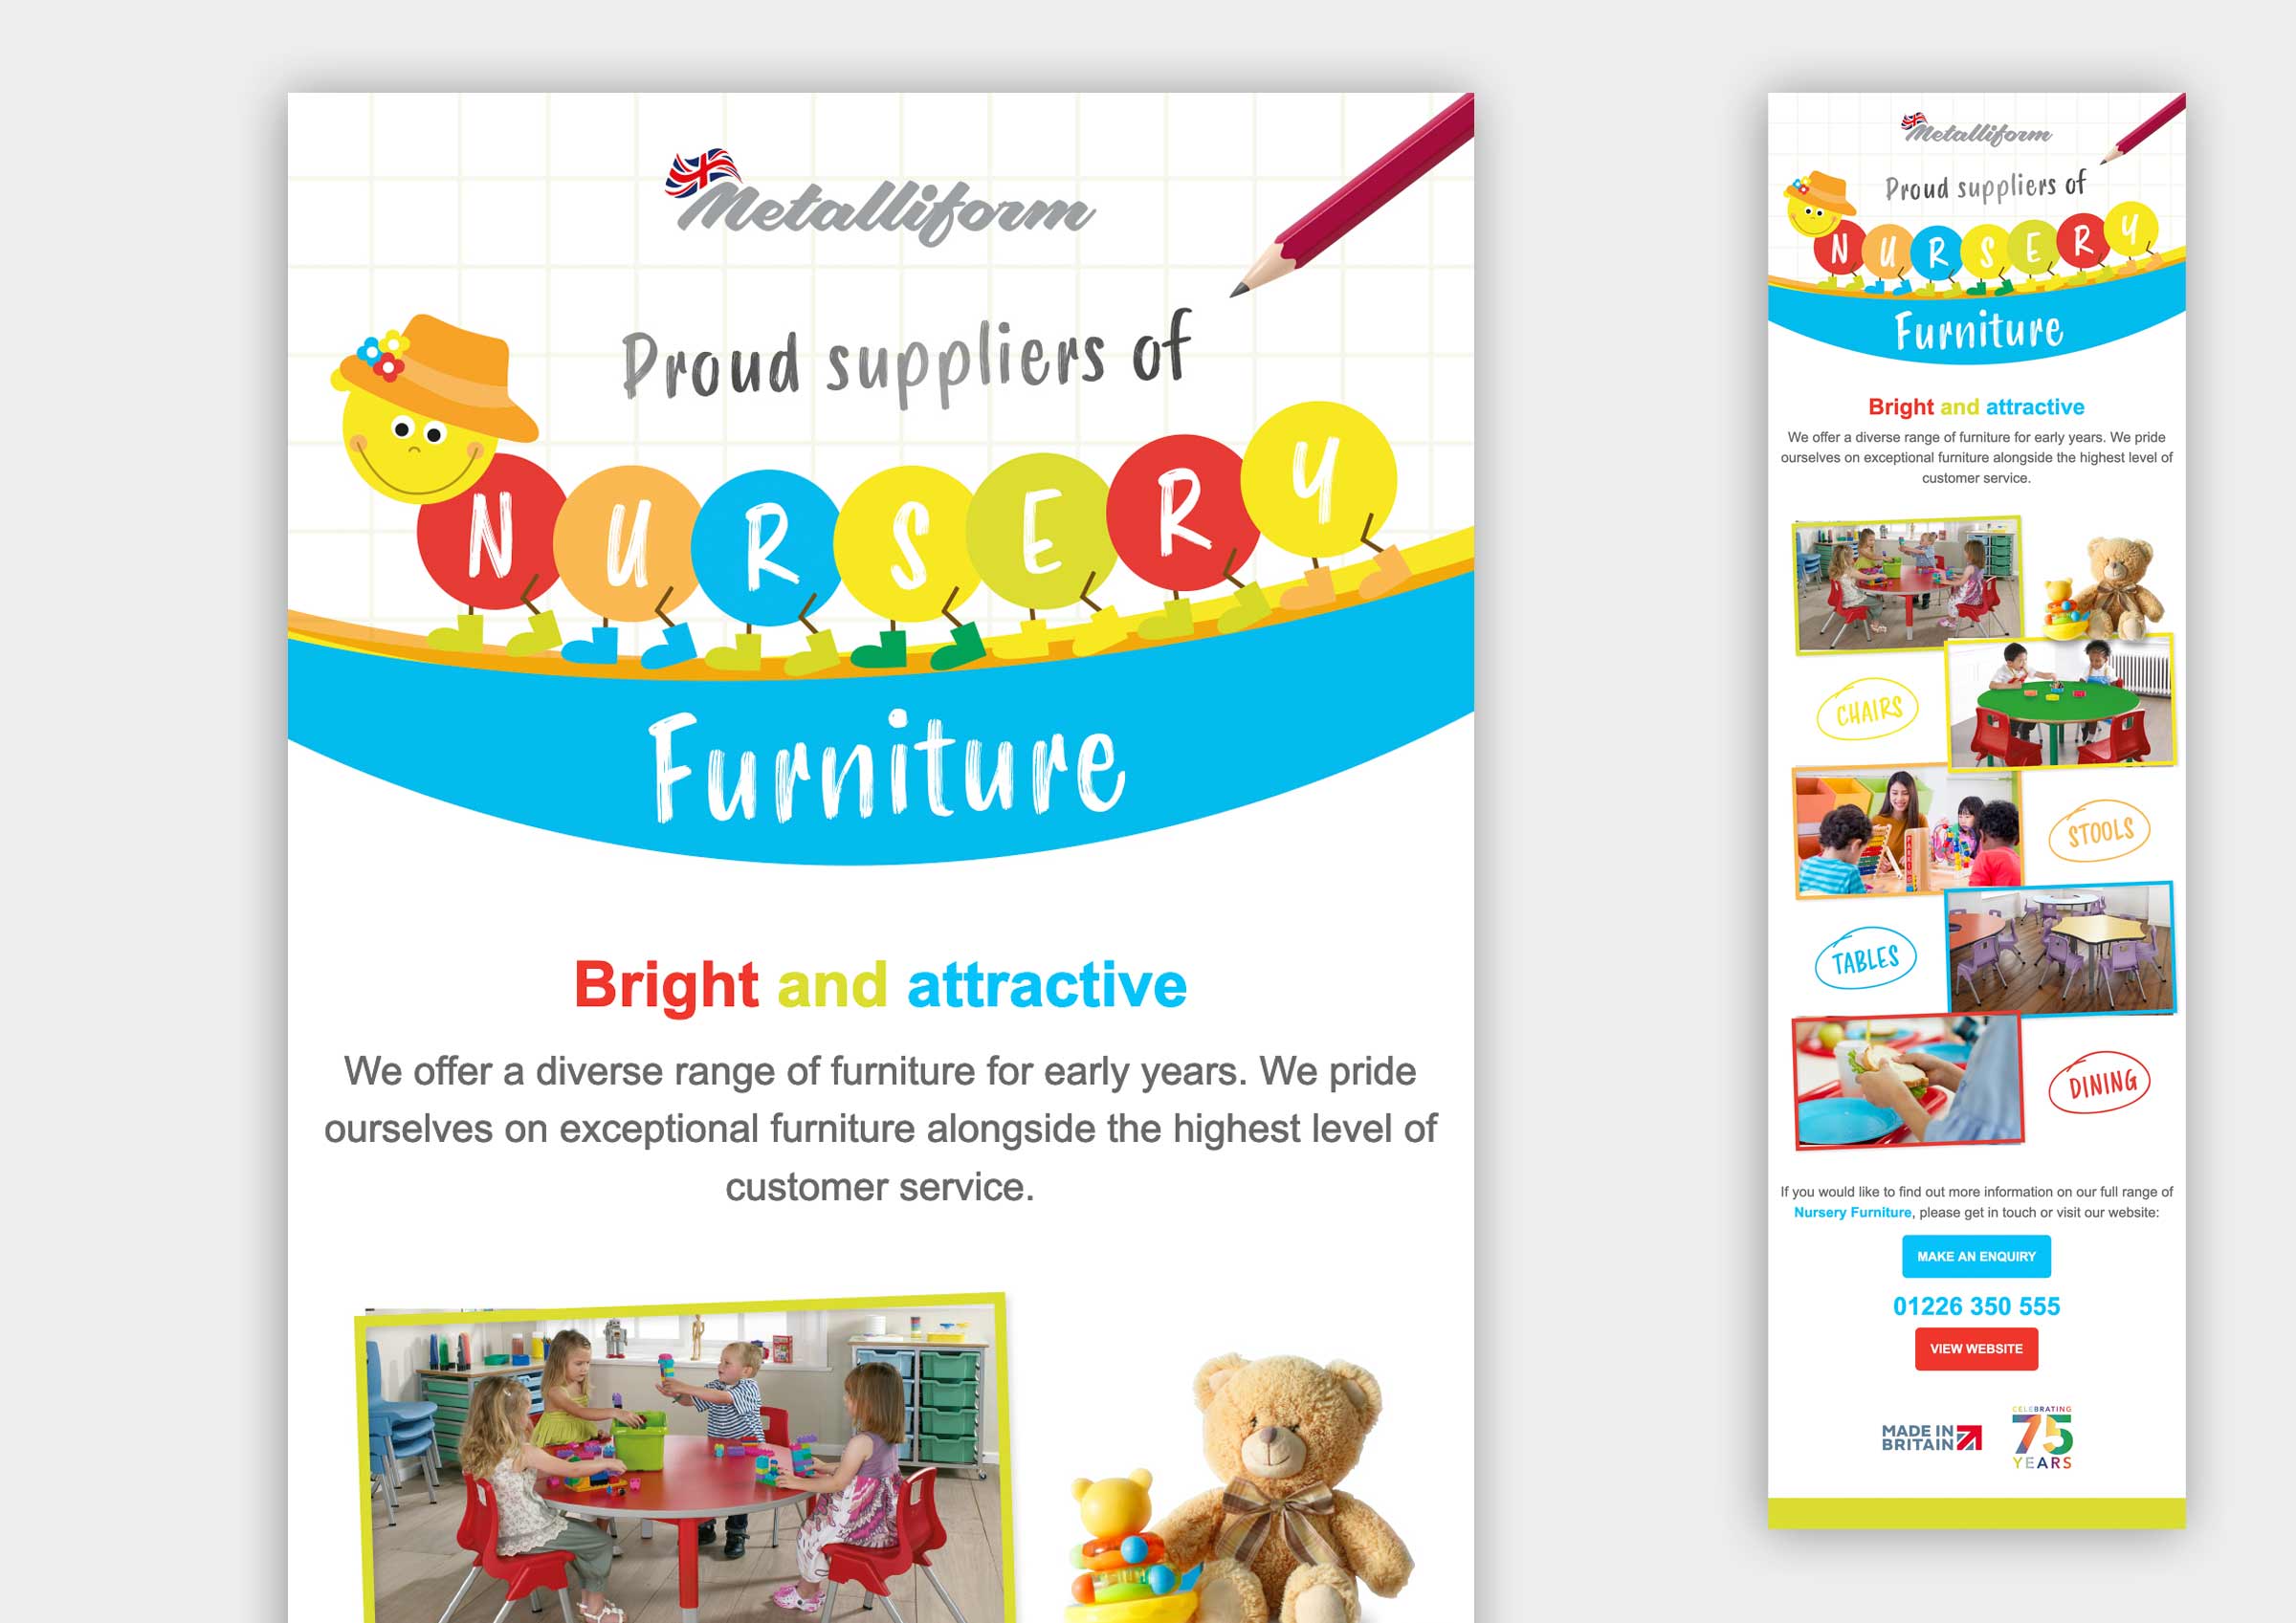 Nursery furniture email campaign and social media advert